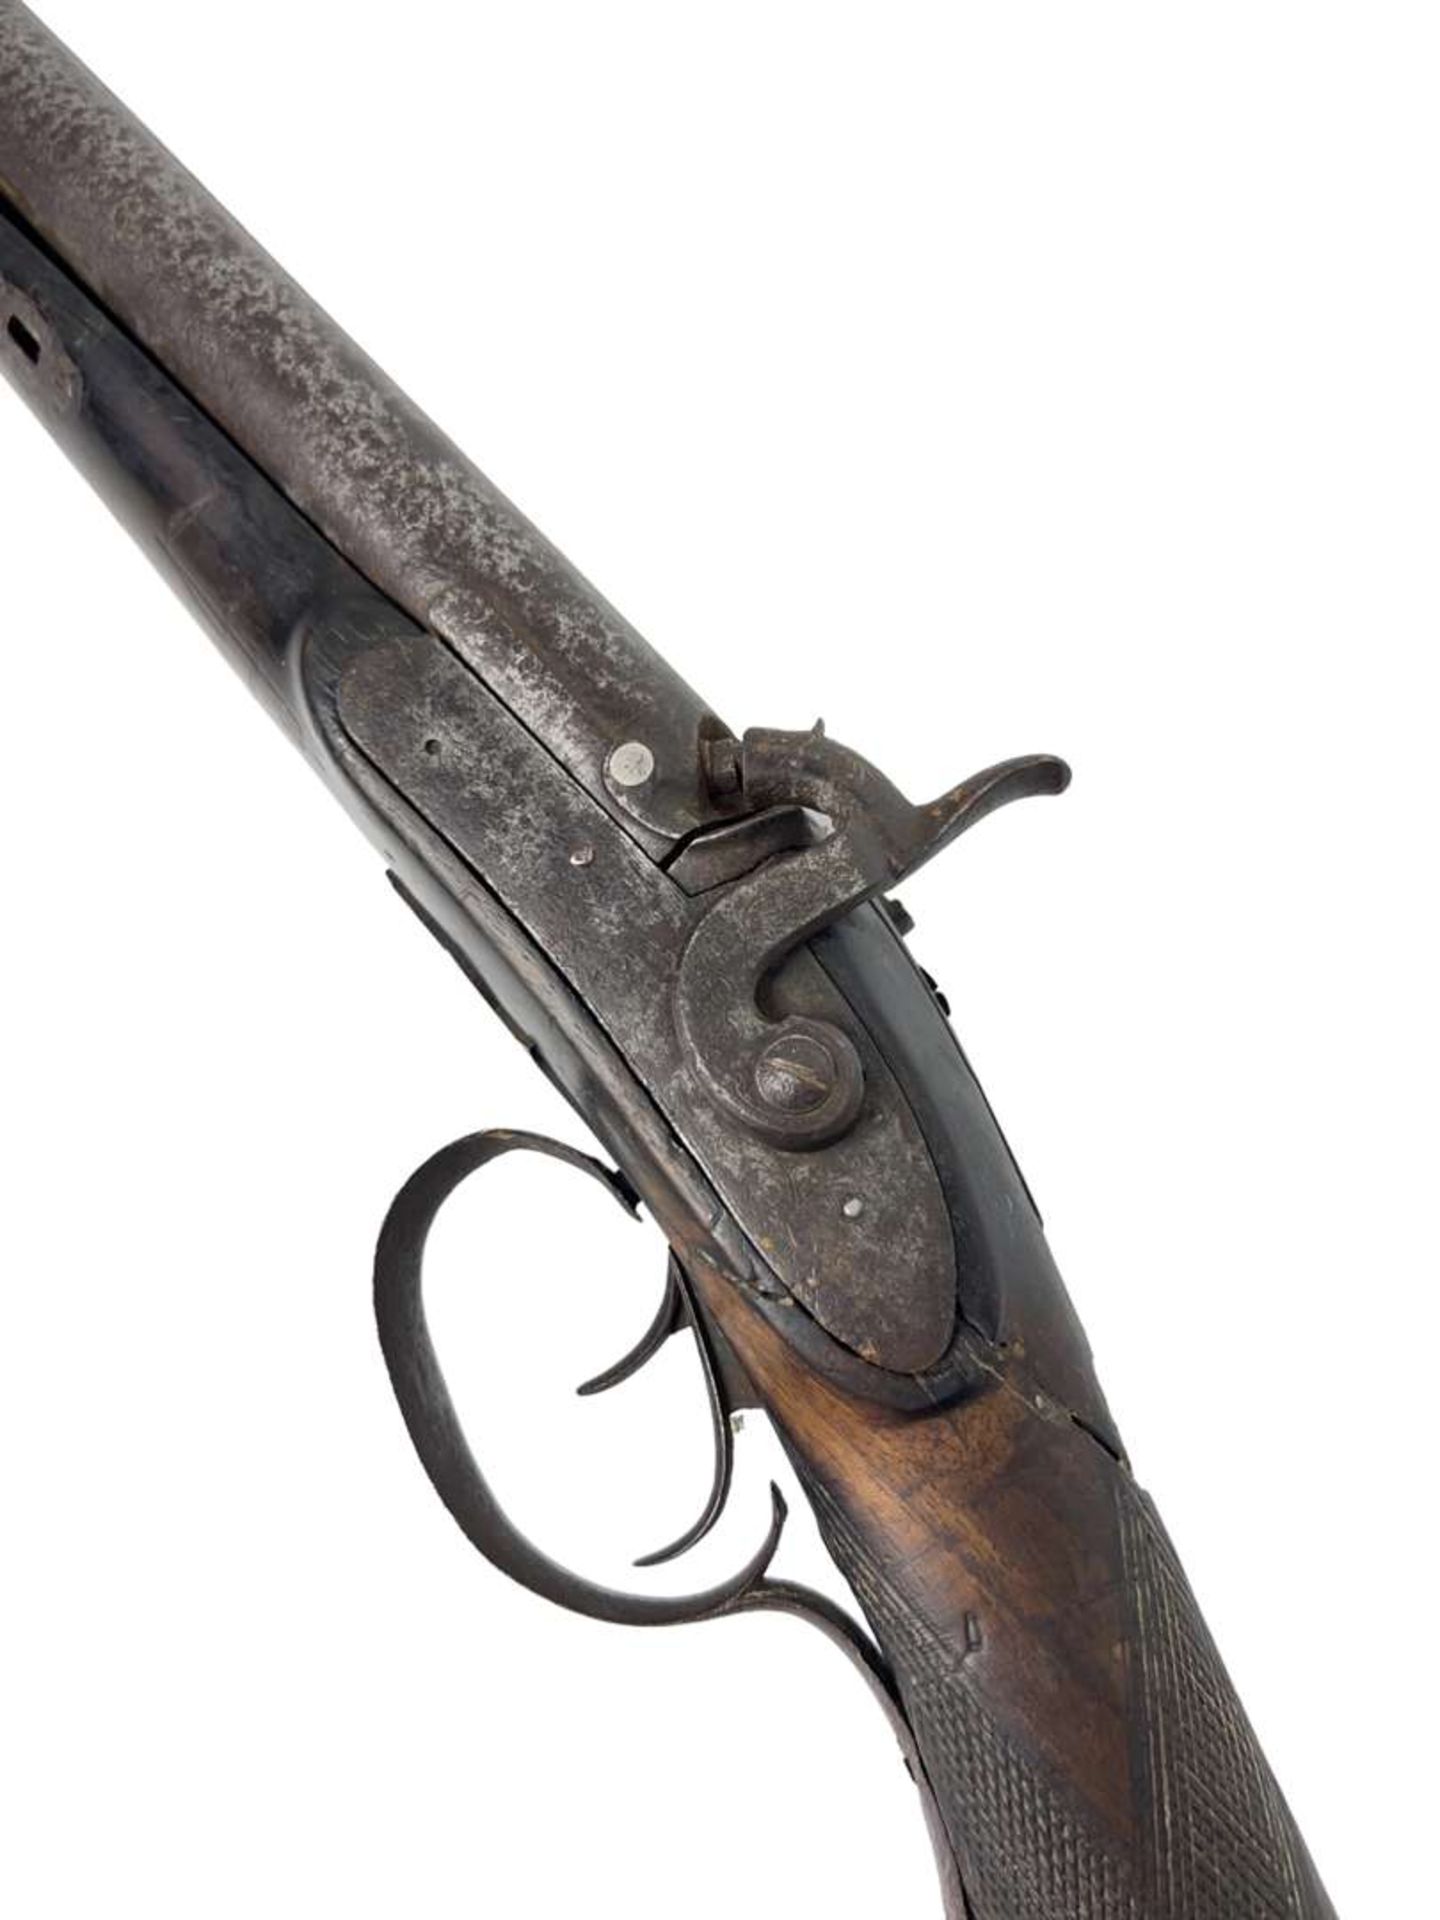 18th/19th Century Percussion Double Barrel Hunting Rifle - Image 5 of 7